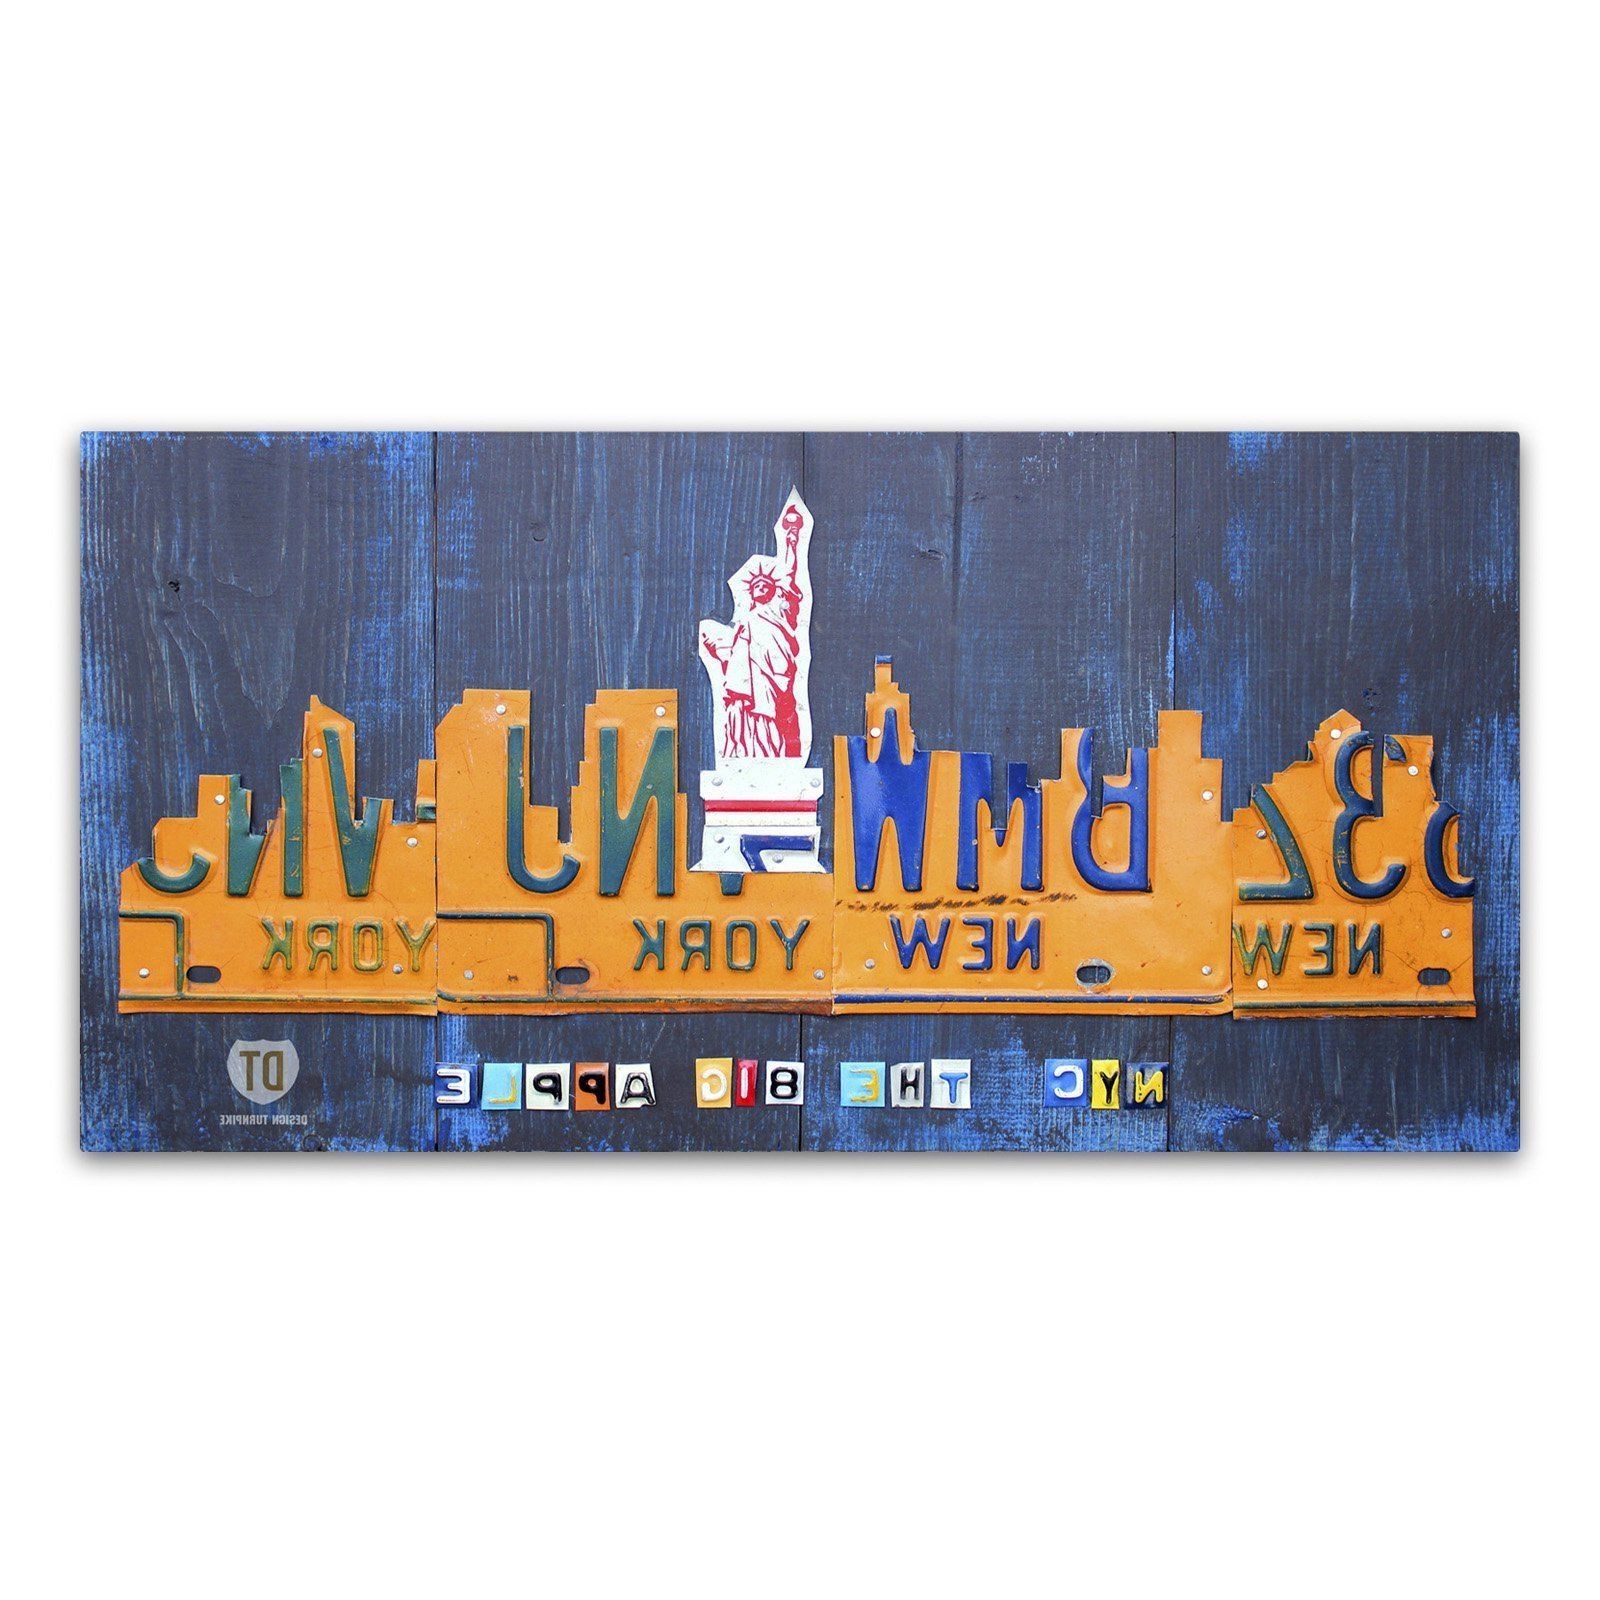 License Plate Map Wall Art Pertaining To Most Recent Us License Plate Map Canvas Valid Trademark Fine Art New York City (View 20 of 20)